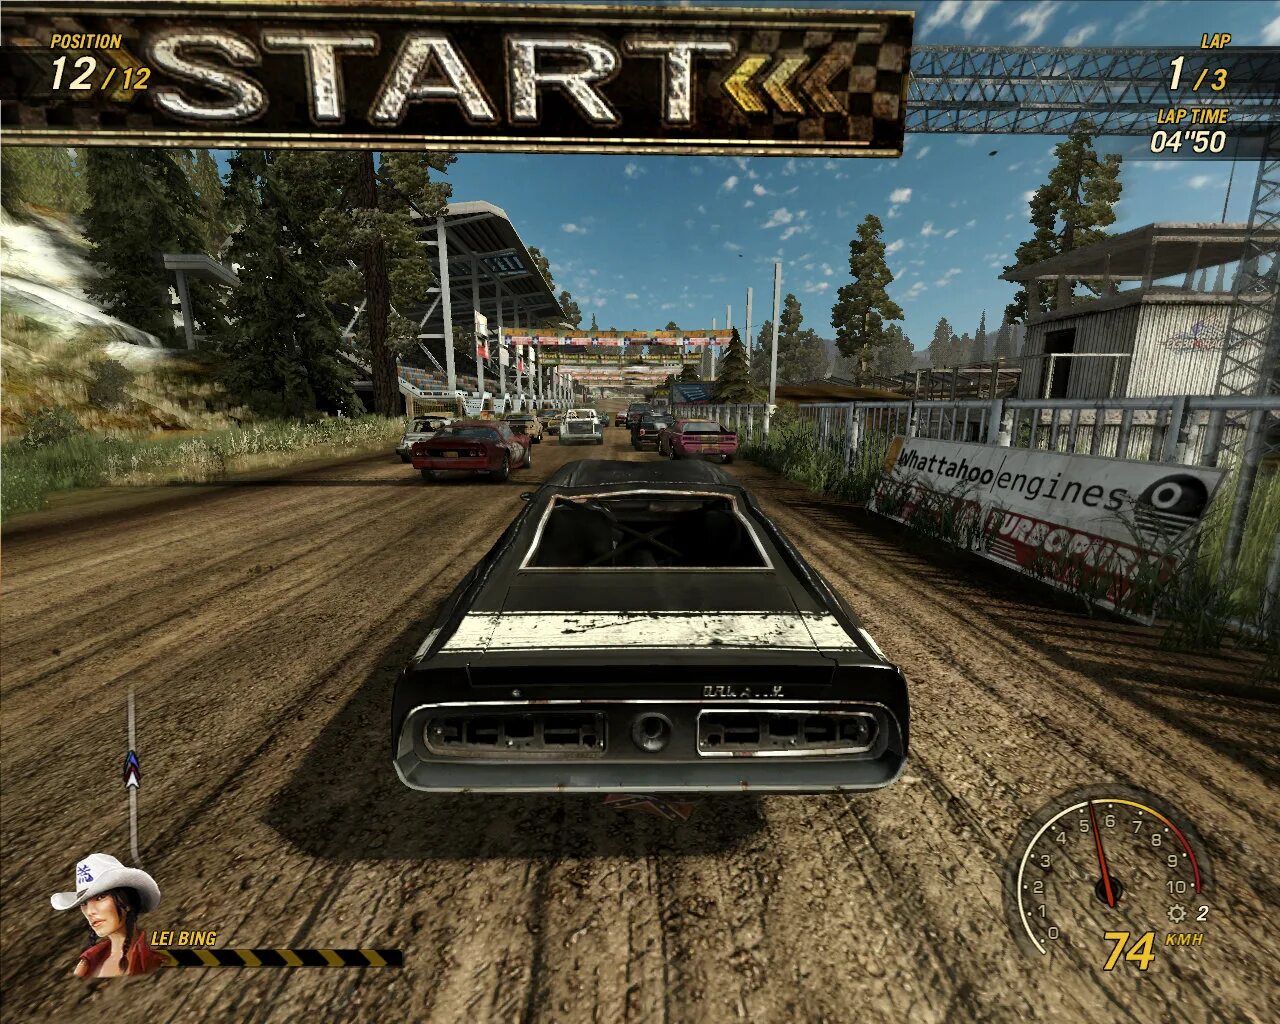 Флетаут игра. Флатаут 1. FLATOUT: Ultimate Carnage. Флатаут 5. Флэт аут Ultimate Carnage.